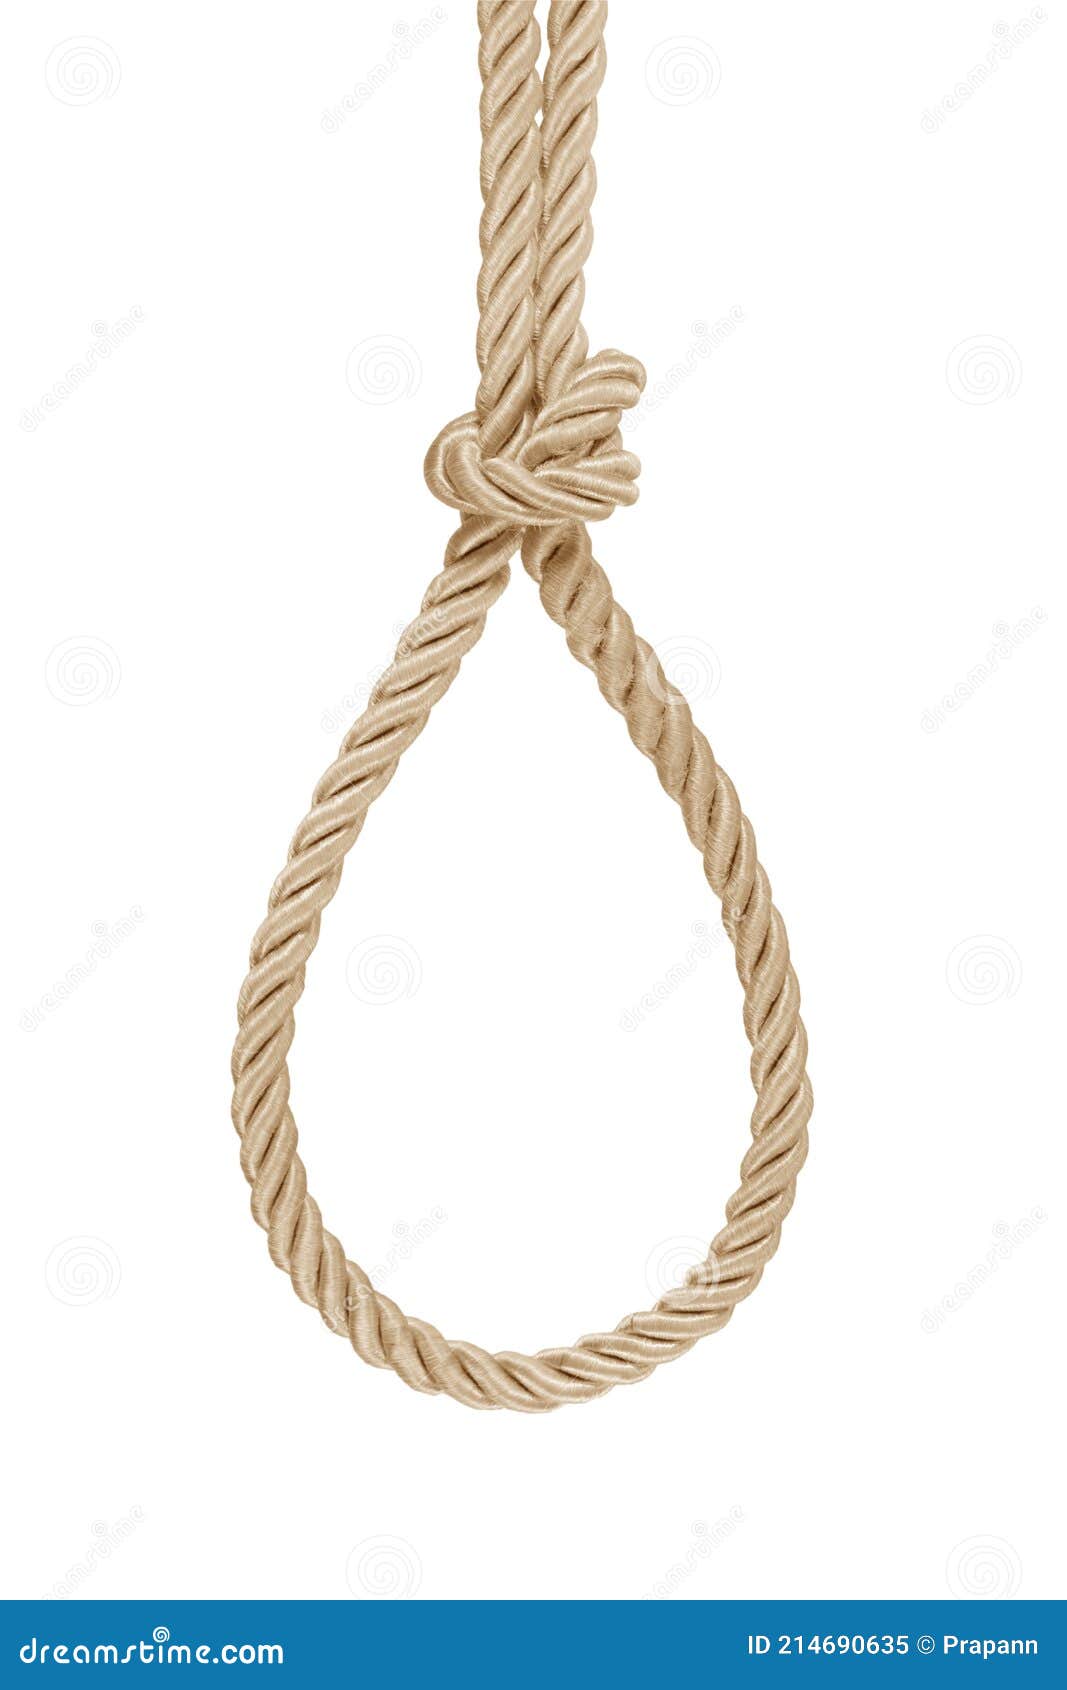 Hanging Rope Knot Tied Isolated on White Stock Image - Image of security,  connection: 214690635